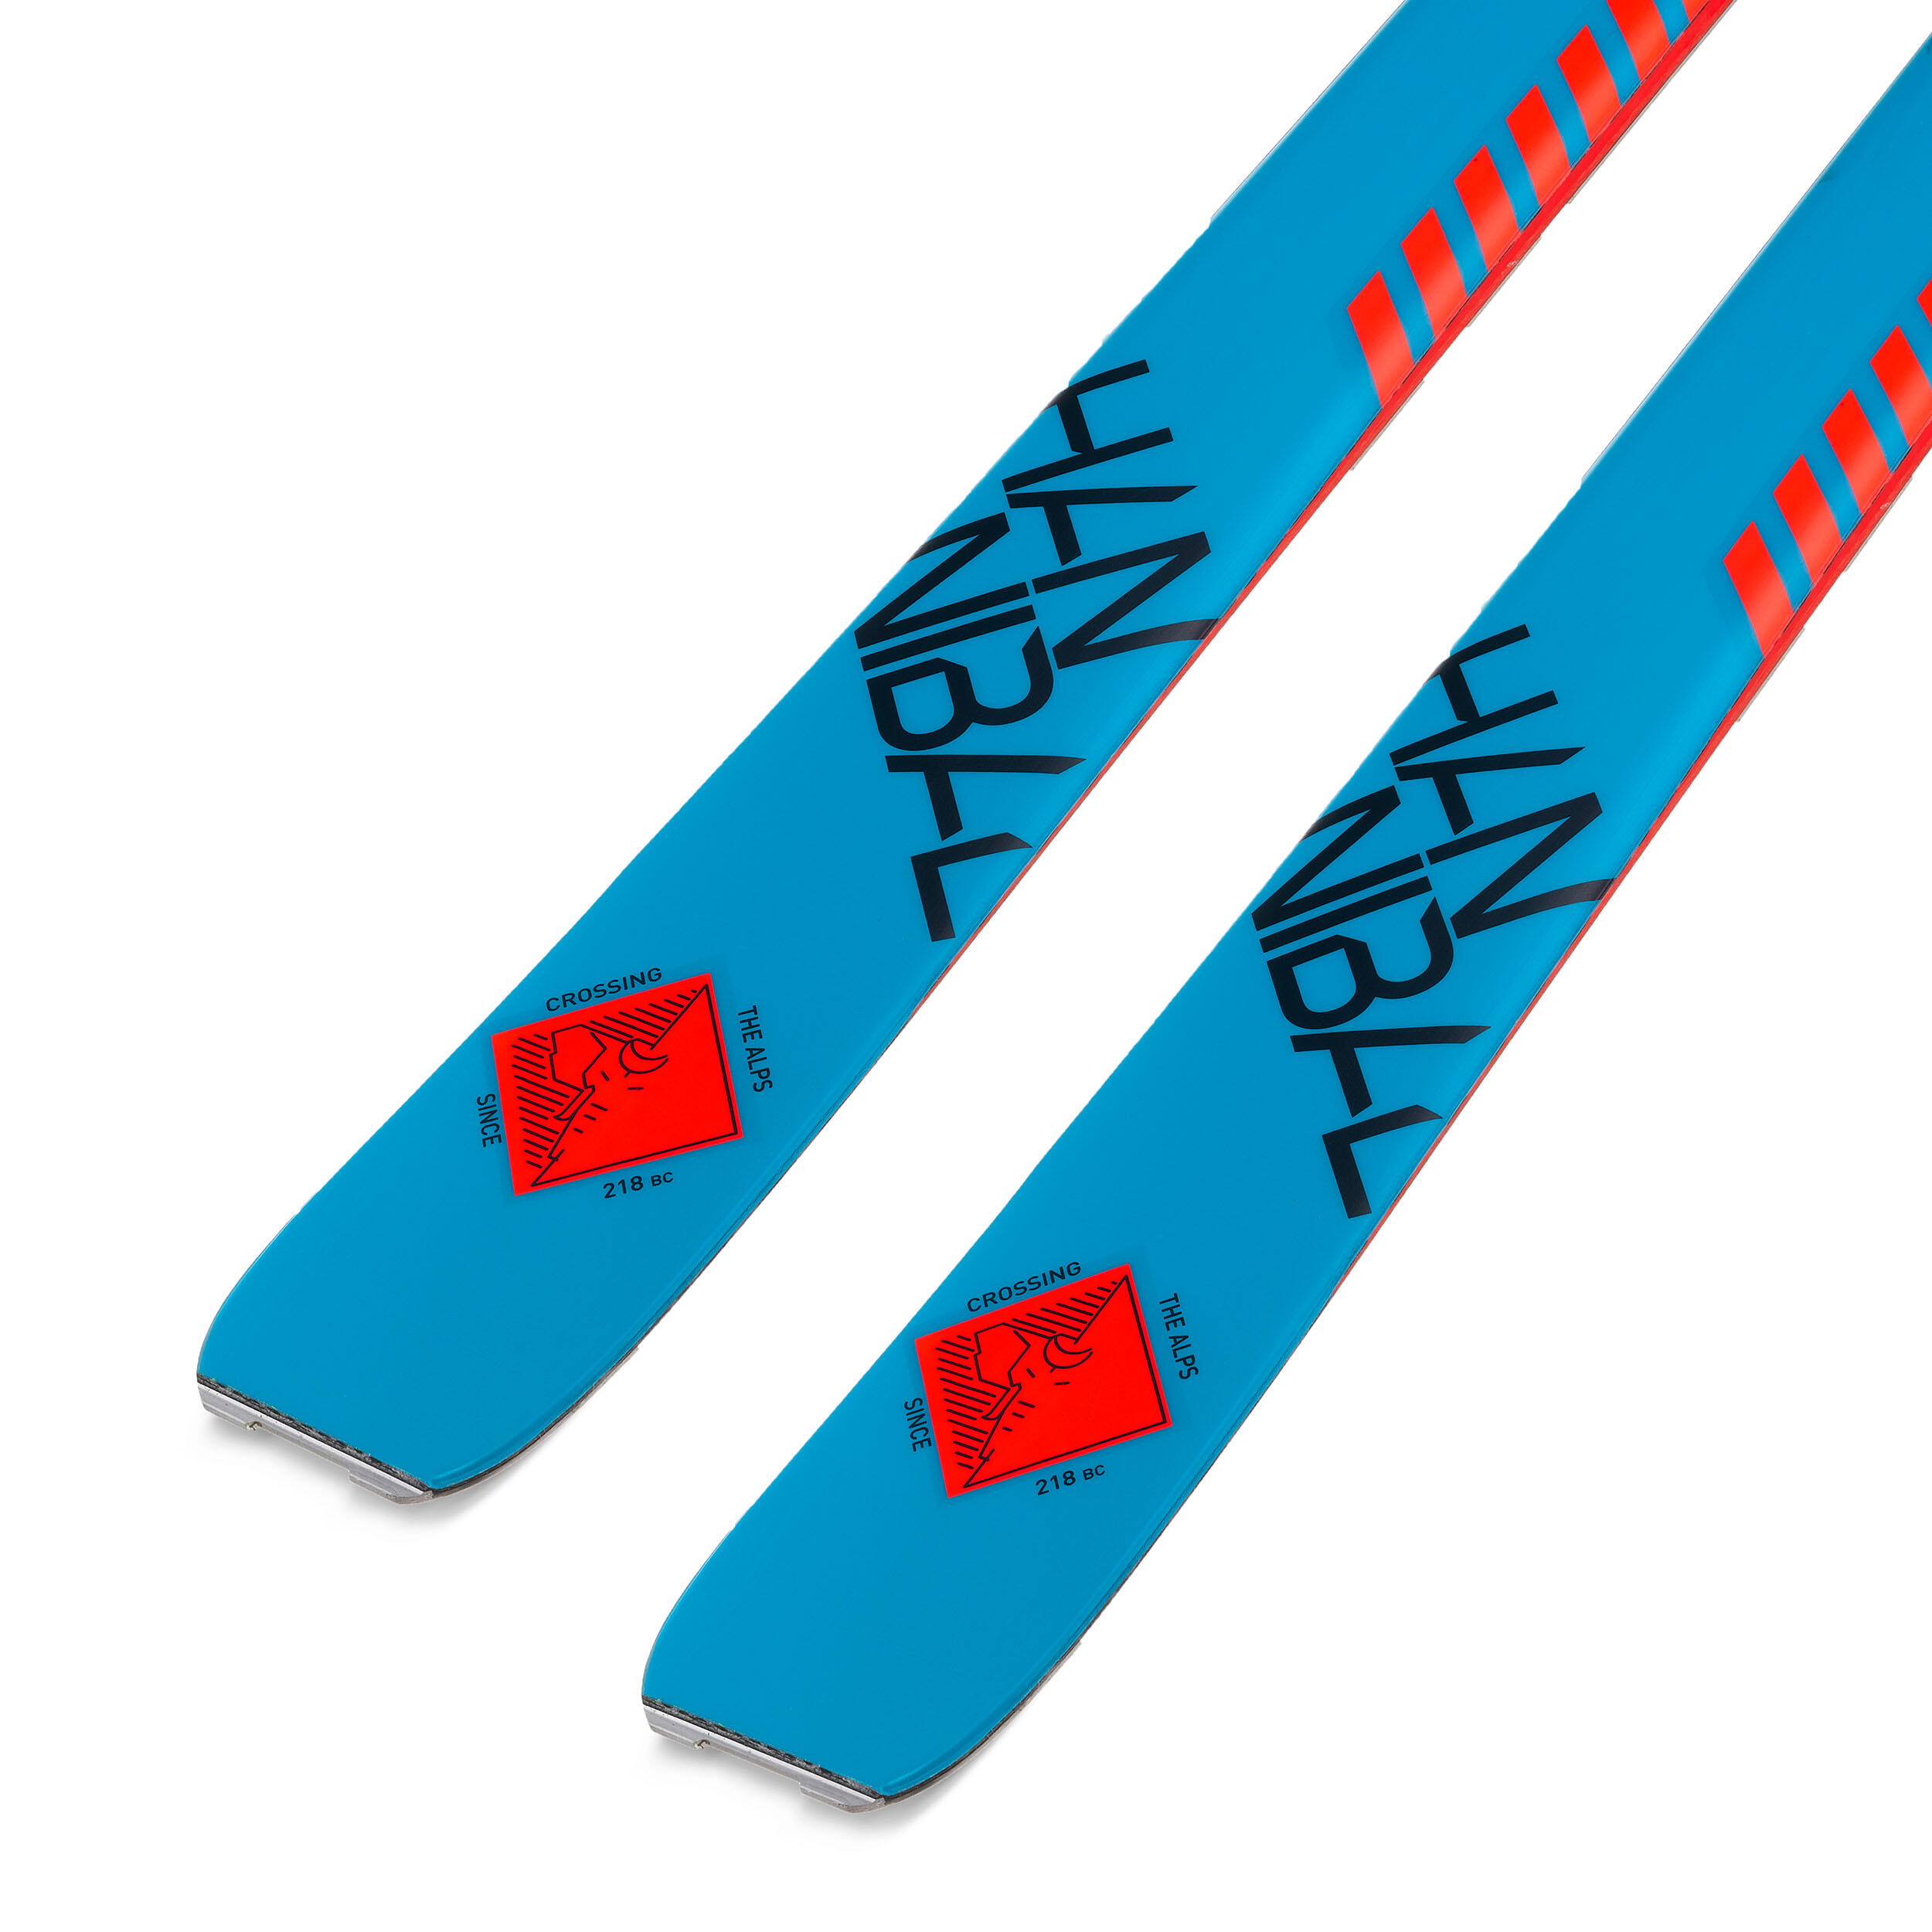 Touring Ski Fischer Hannibal 96 Carbon (without skins) 3/5